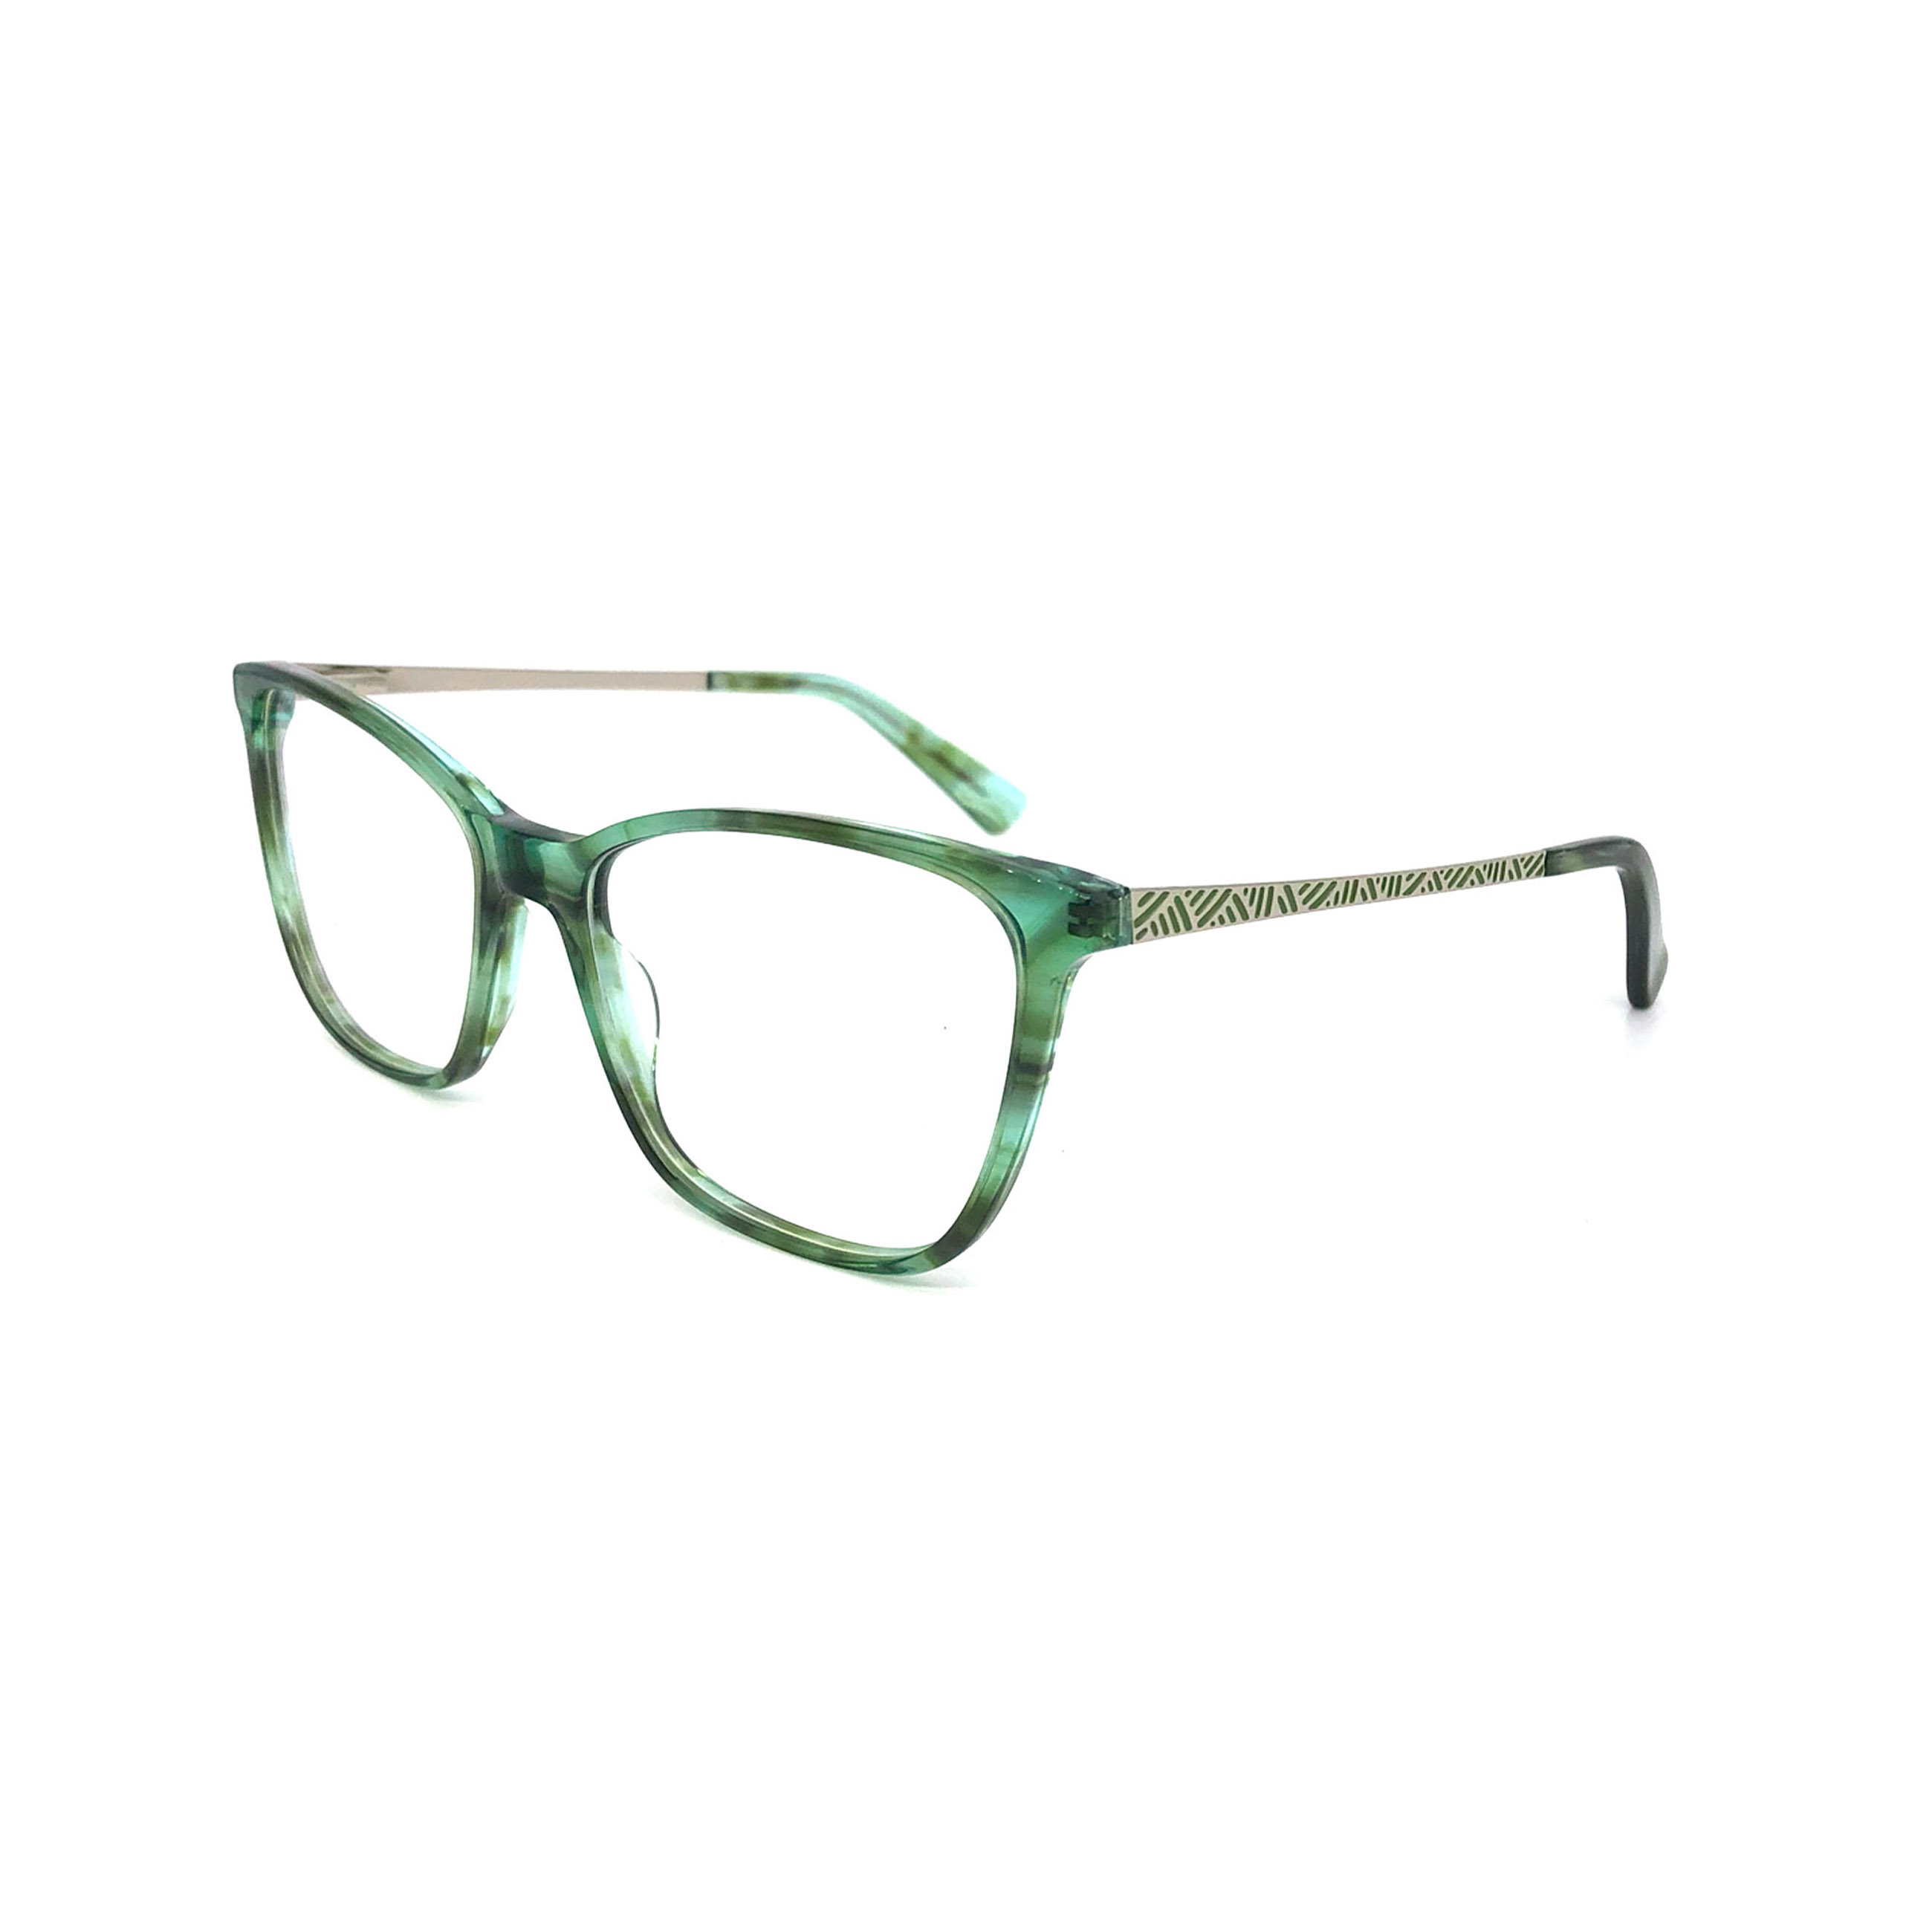 Women Iterated Retro Butterfly Eyeglasses With Acetate And Metal Combination